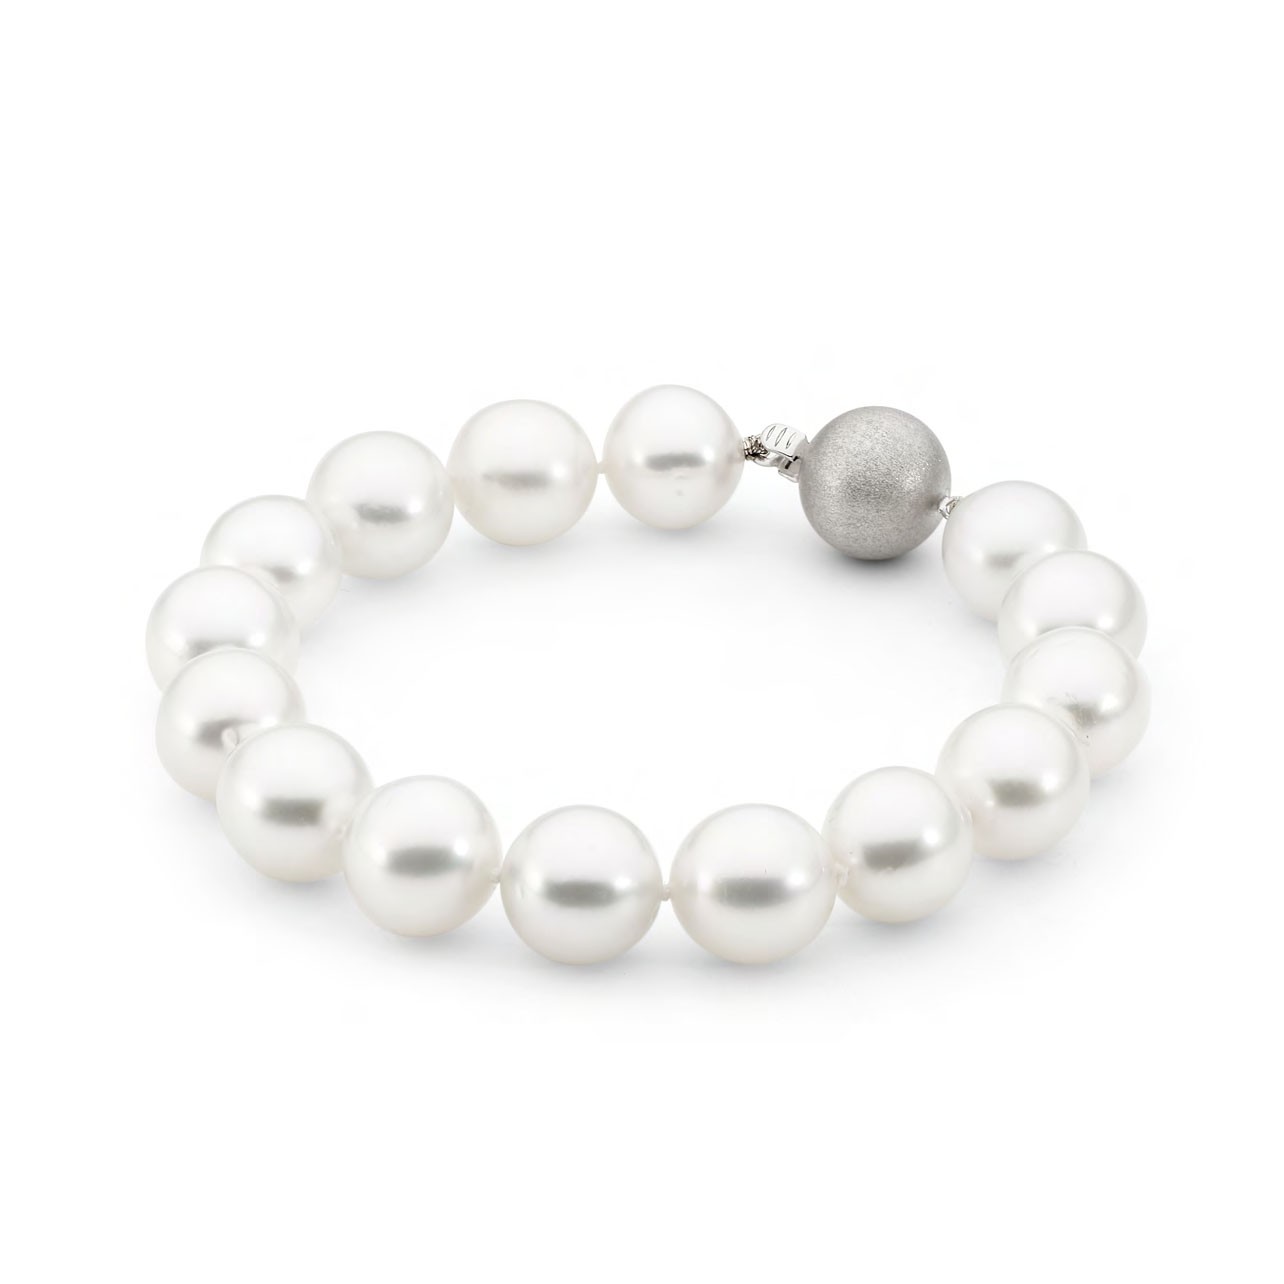 About - Allure South Sea Pearls